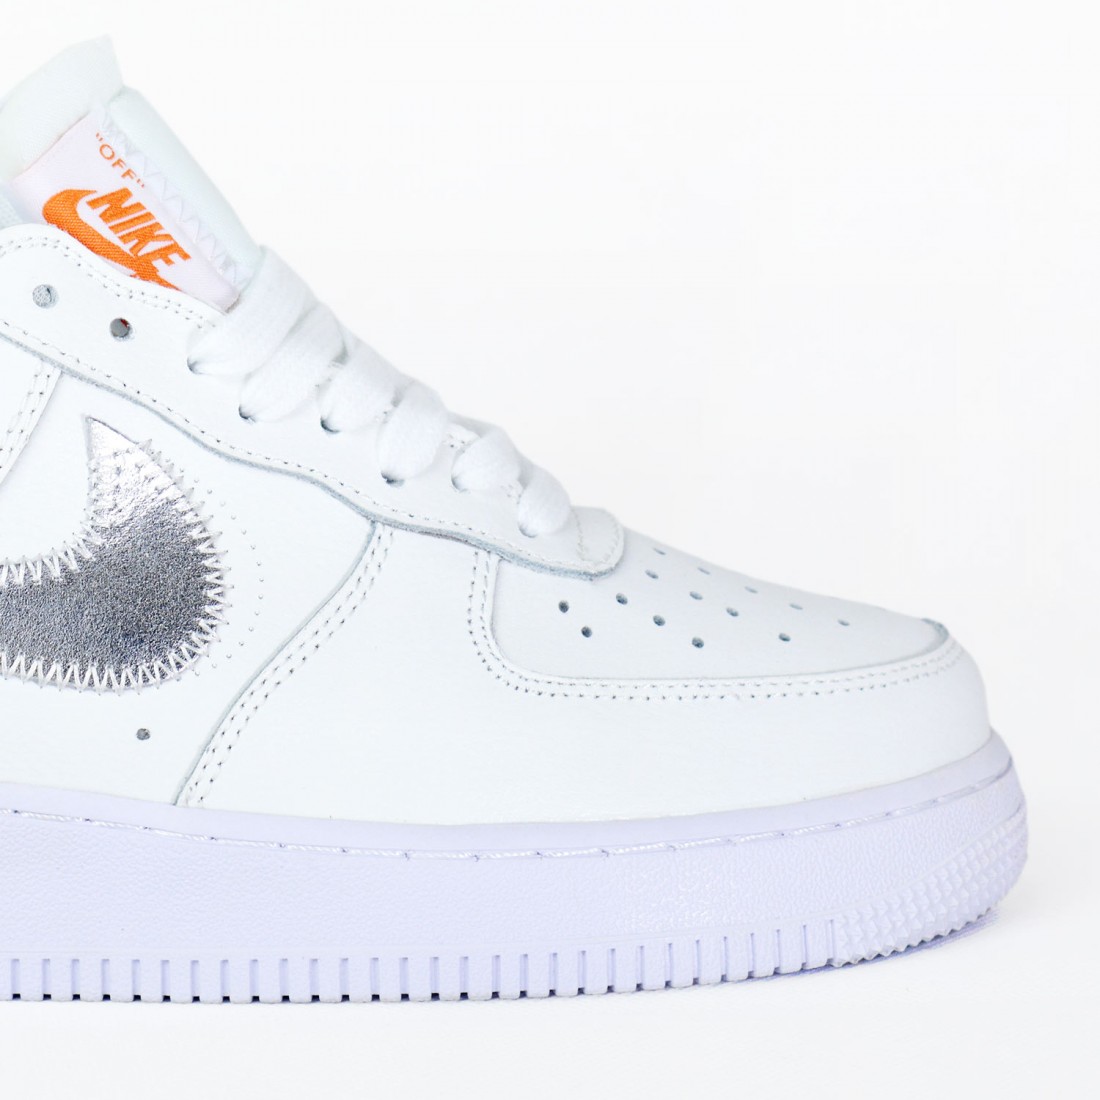 Buy Online Off-White X Air Force 1 Low Complexcon In Pakistan | Nike Off-White X Air Force Best 